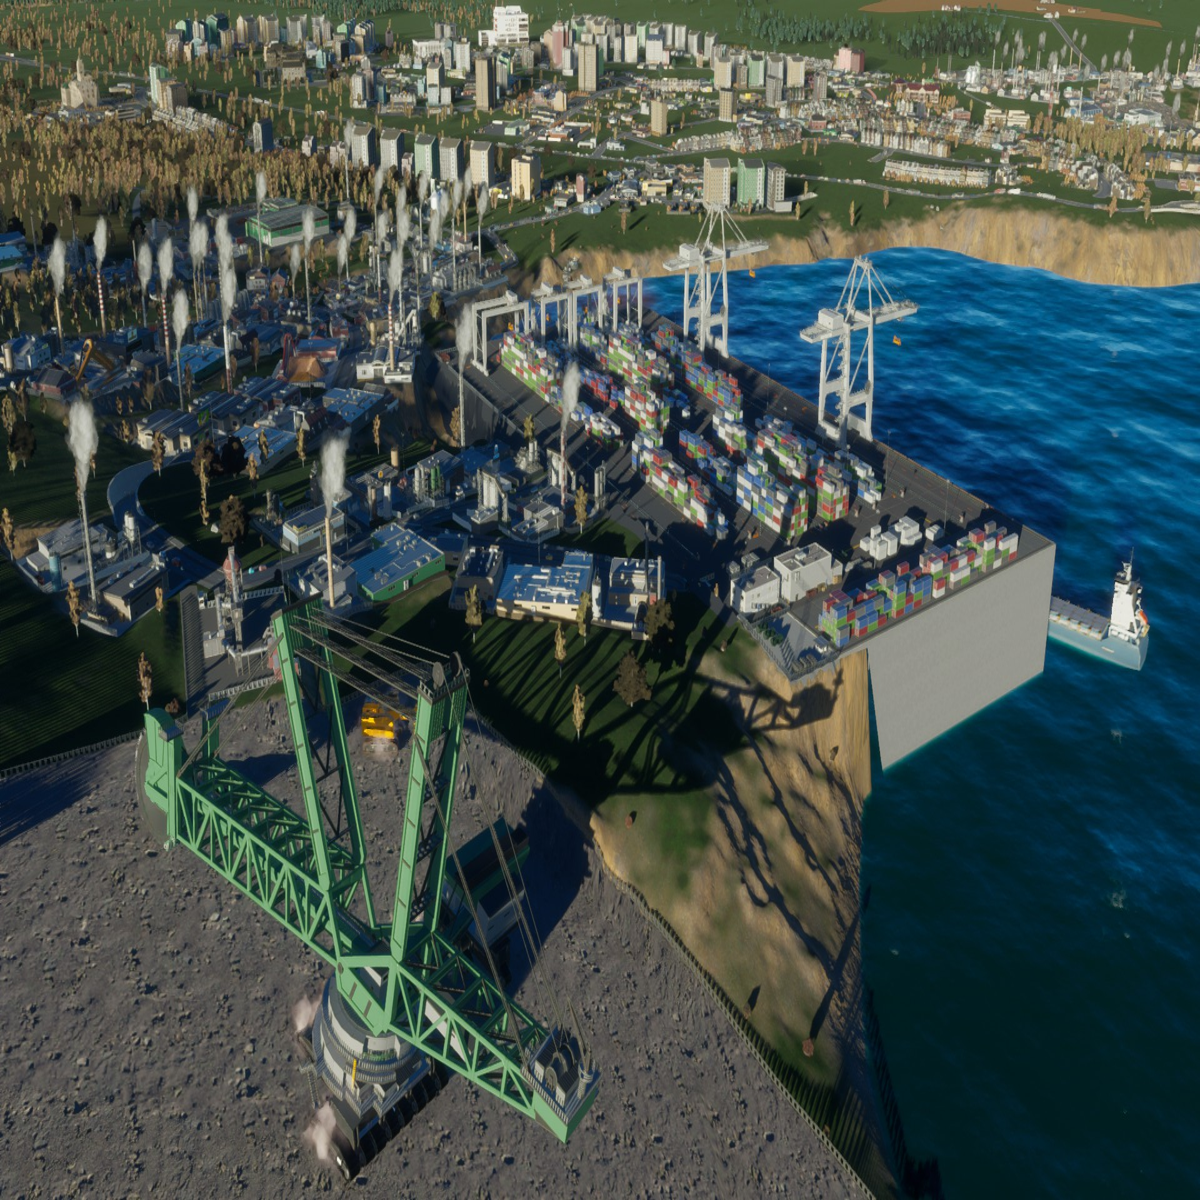 Ahead of Cities: Skylines 2, the devs detail the final DLC for the original  game